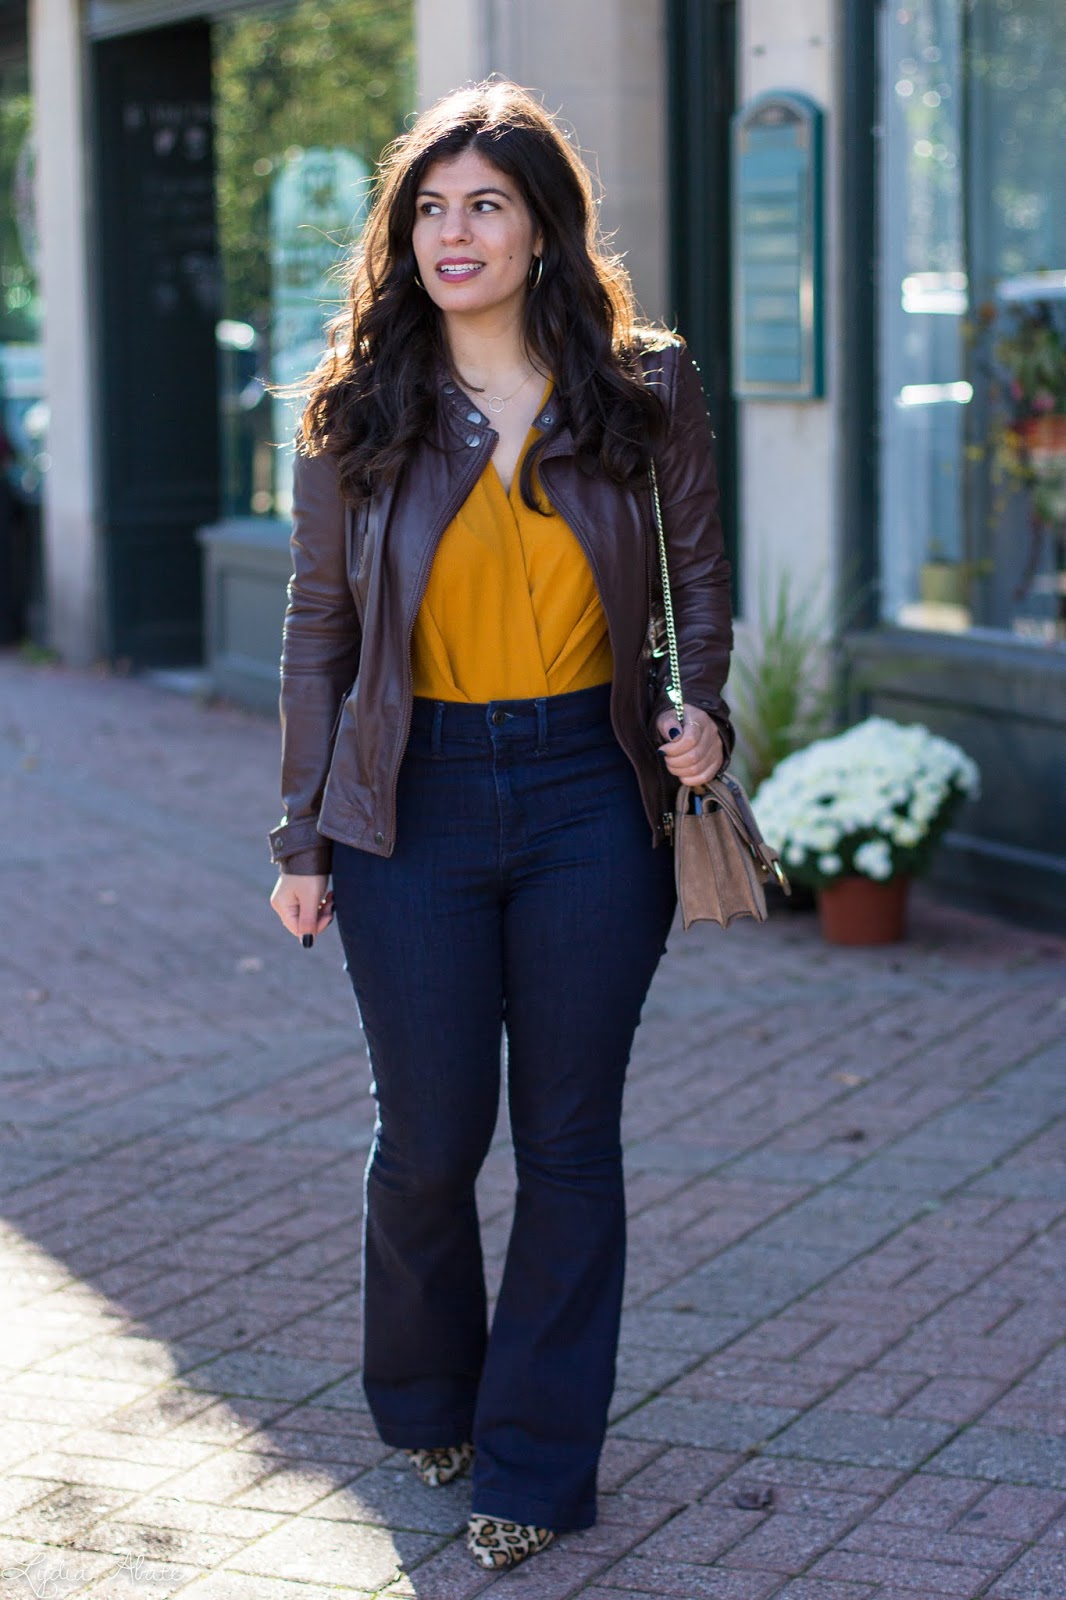 Autumnal Shades - Chic on the Cheap | Connecticut based style blogger on a  budget, by Lydia Abate